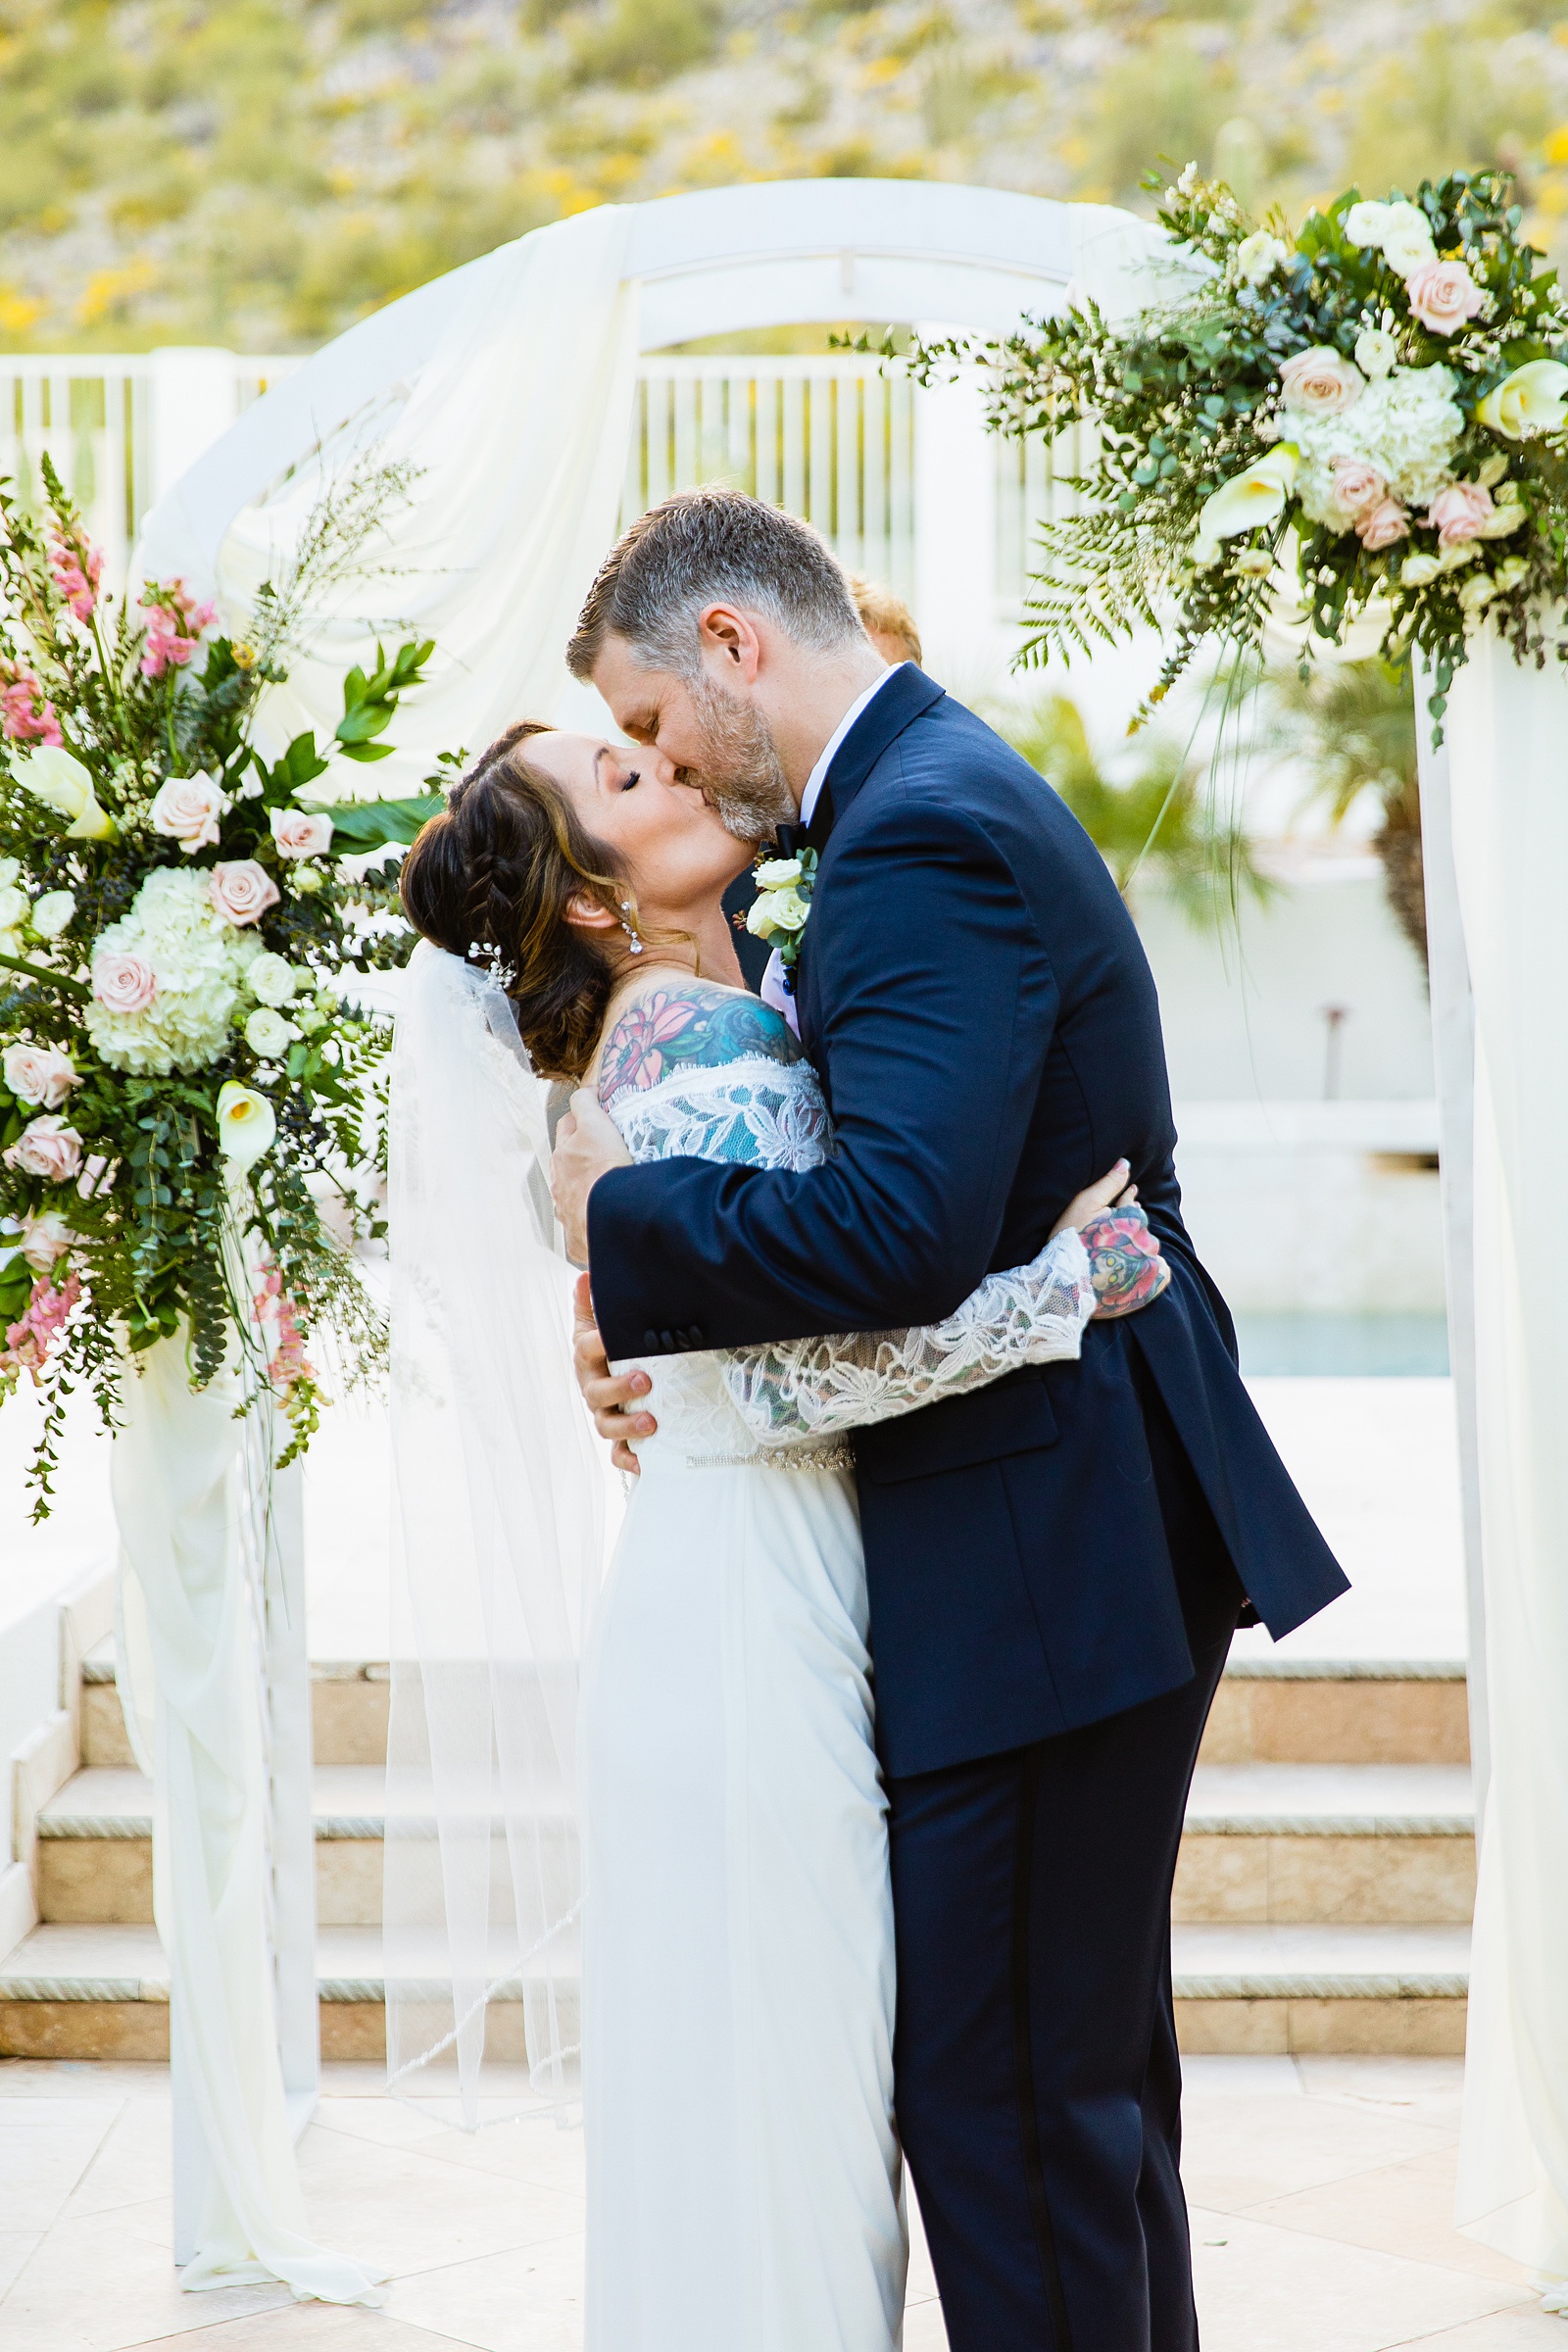 Bride and groom share their first kiss during their wedding ceremony at backyard by Arizona wedding photographer PMA Photography.